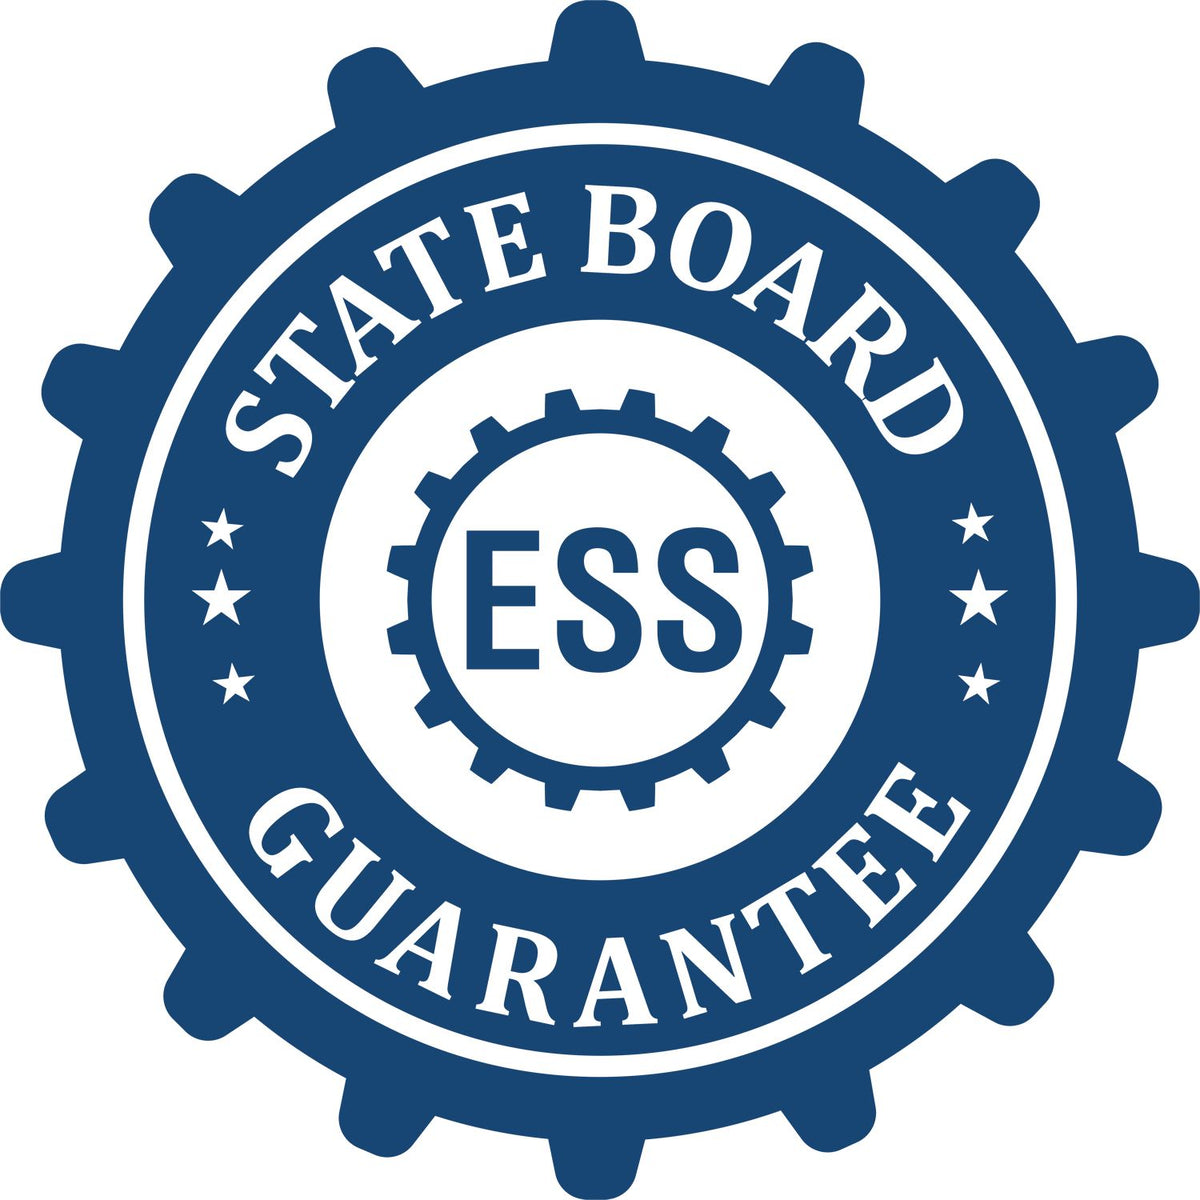 An emblem in a gear shape illustrating a state board guarantee for the Soft Rhode Island Professional Engineer Seal product.